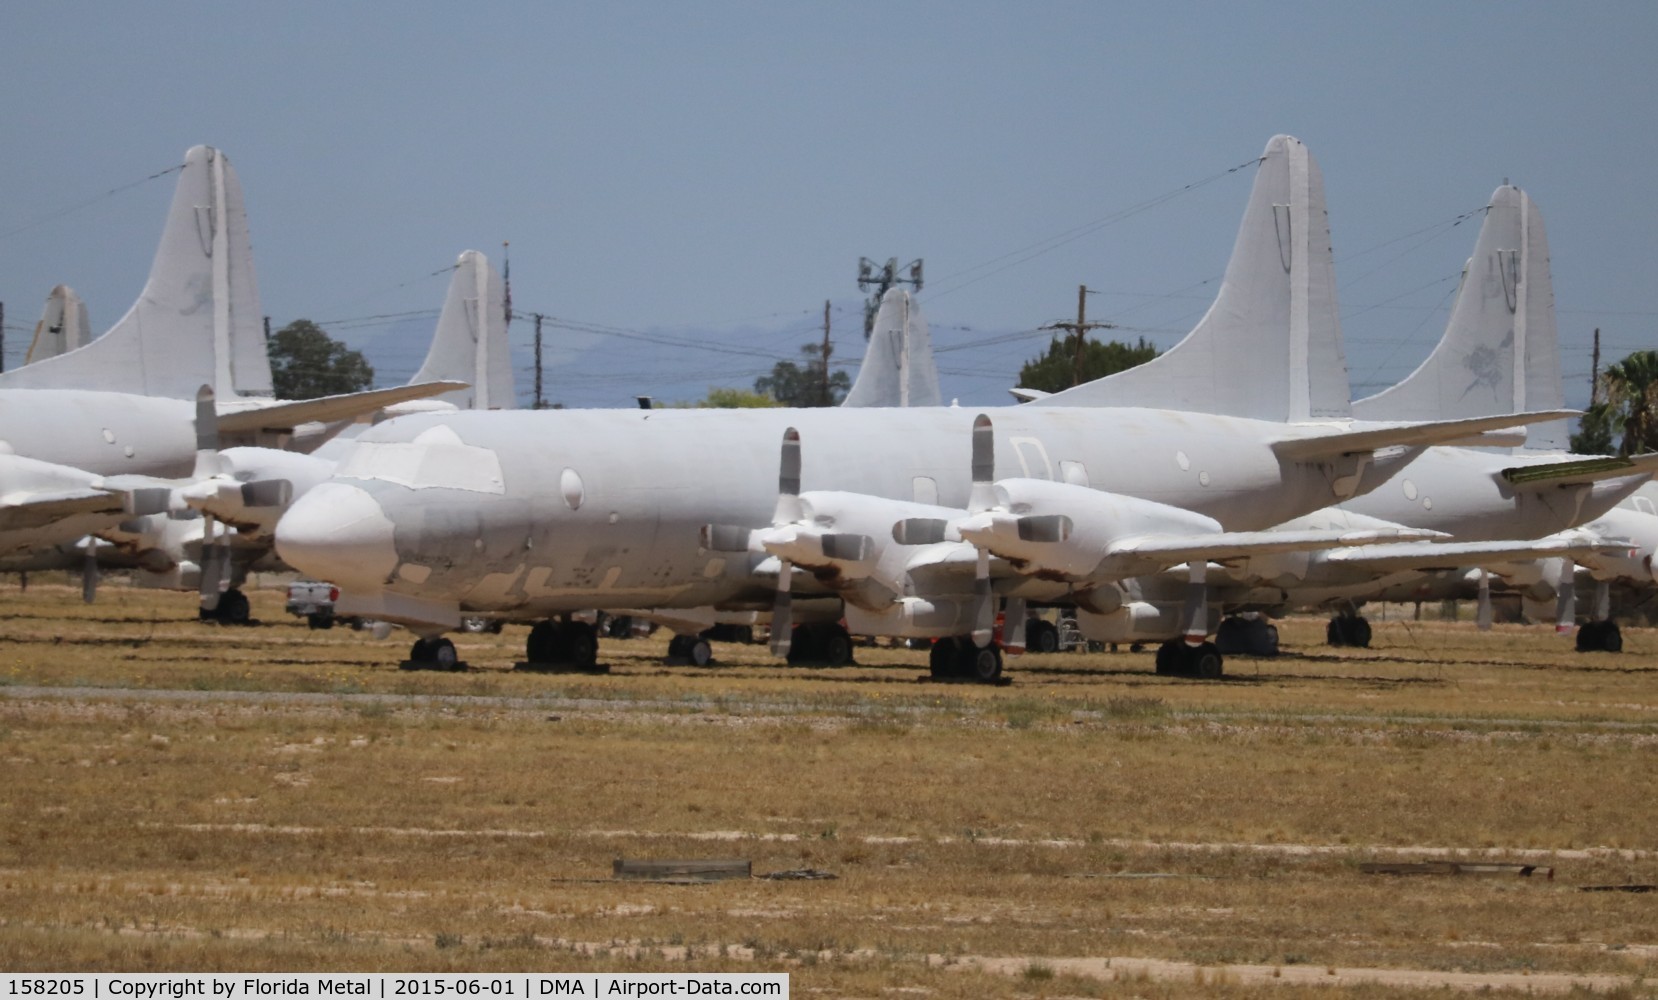 158205, Lockheed P-3C Orion C/N 285A-5549, P-3C Orion